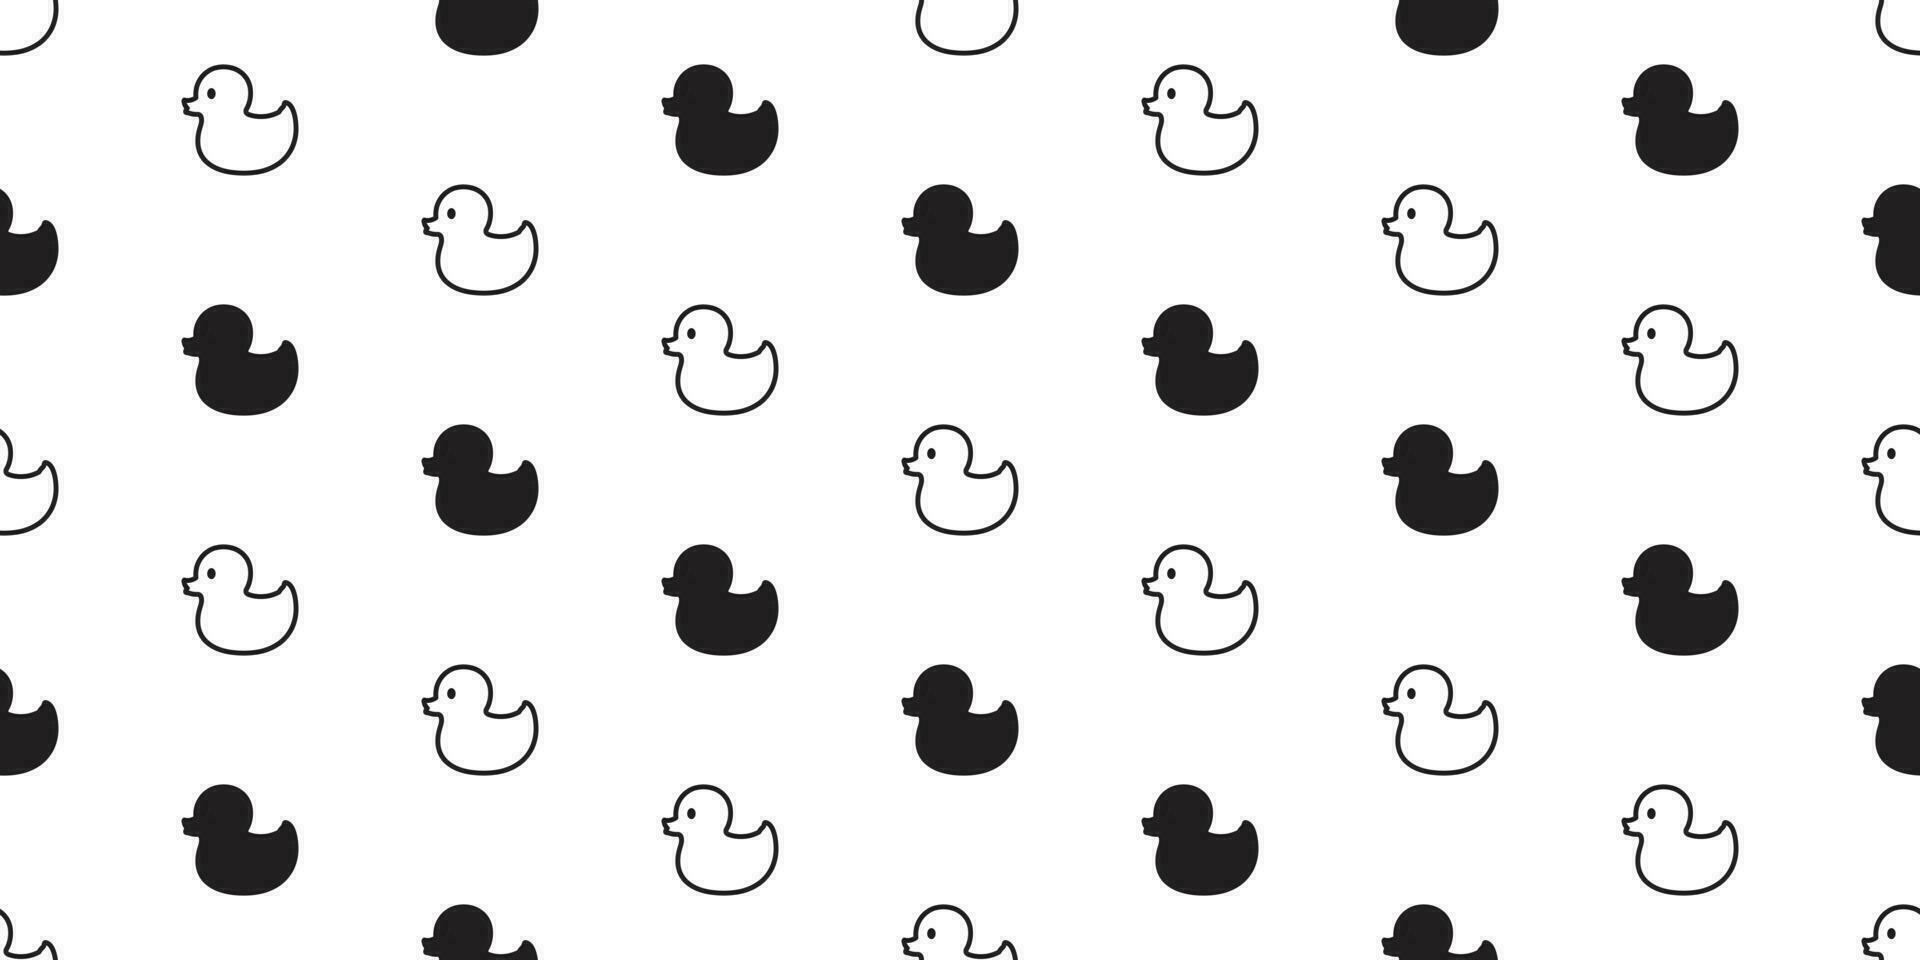 duck seamless pattern rubber duck vector tile background scarf isolated repeat wallpaper illustration character cartoon stripes